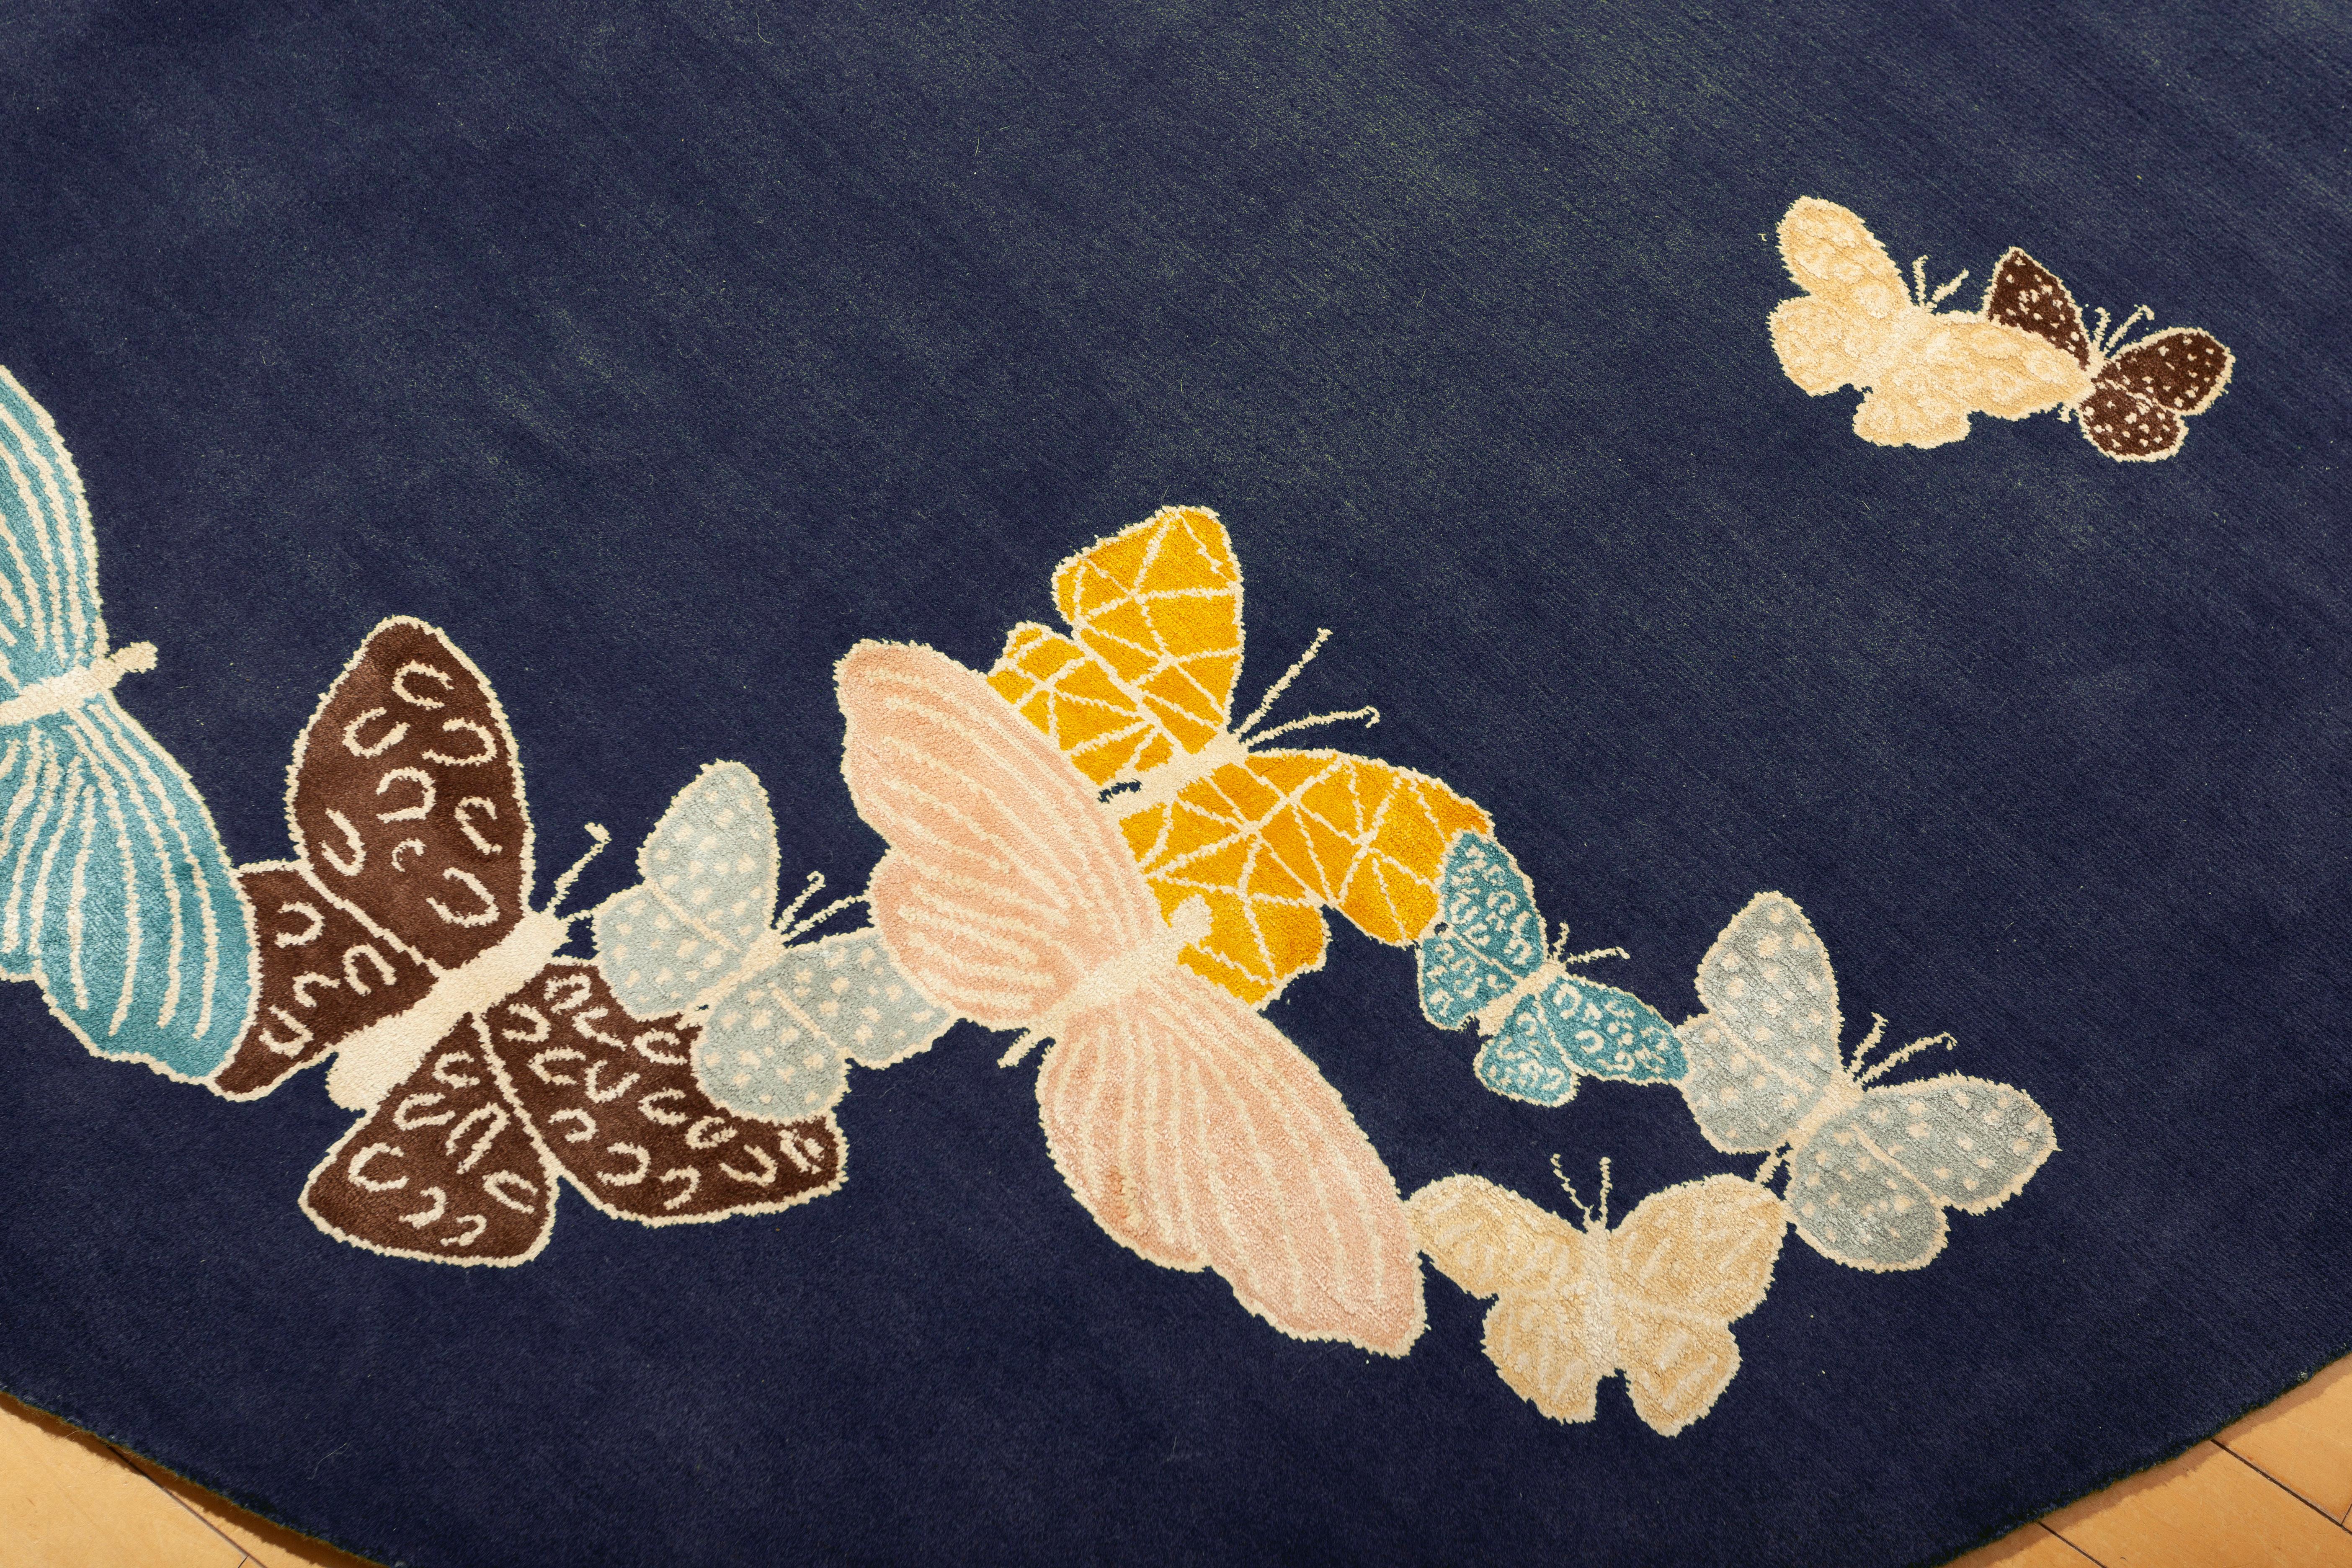 Sergio Mannino Studio's collection of rugs is expanded with new designs. (See storefront to look at other items).
Hand-drawn butterflies seem to come out of the floor. The background is wool, while the butterflies are made with a silk